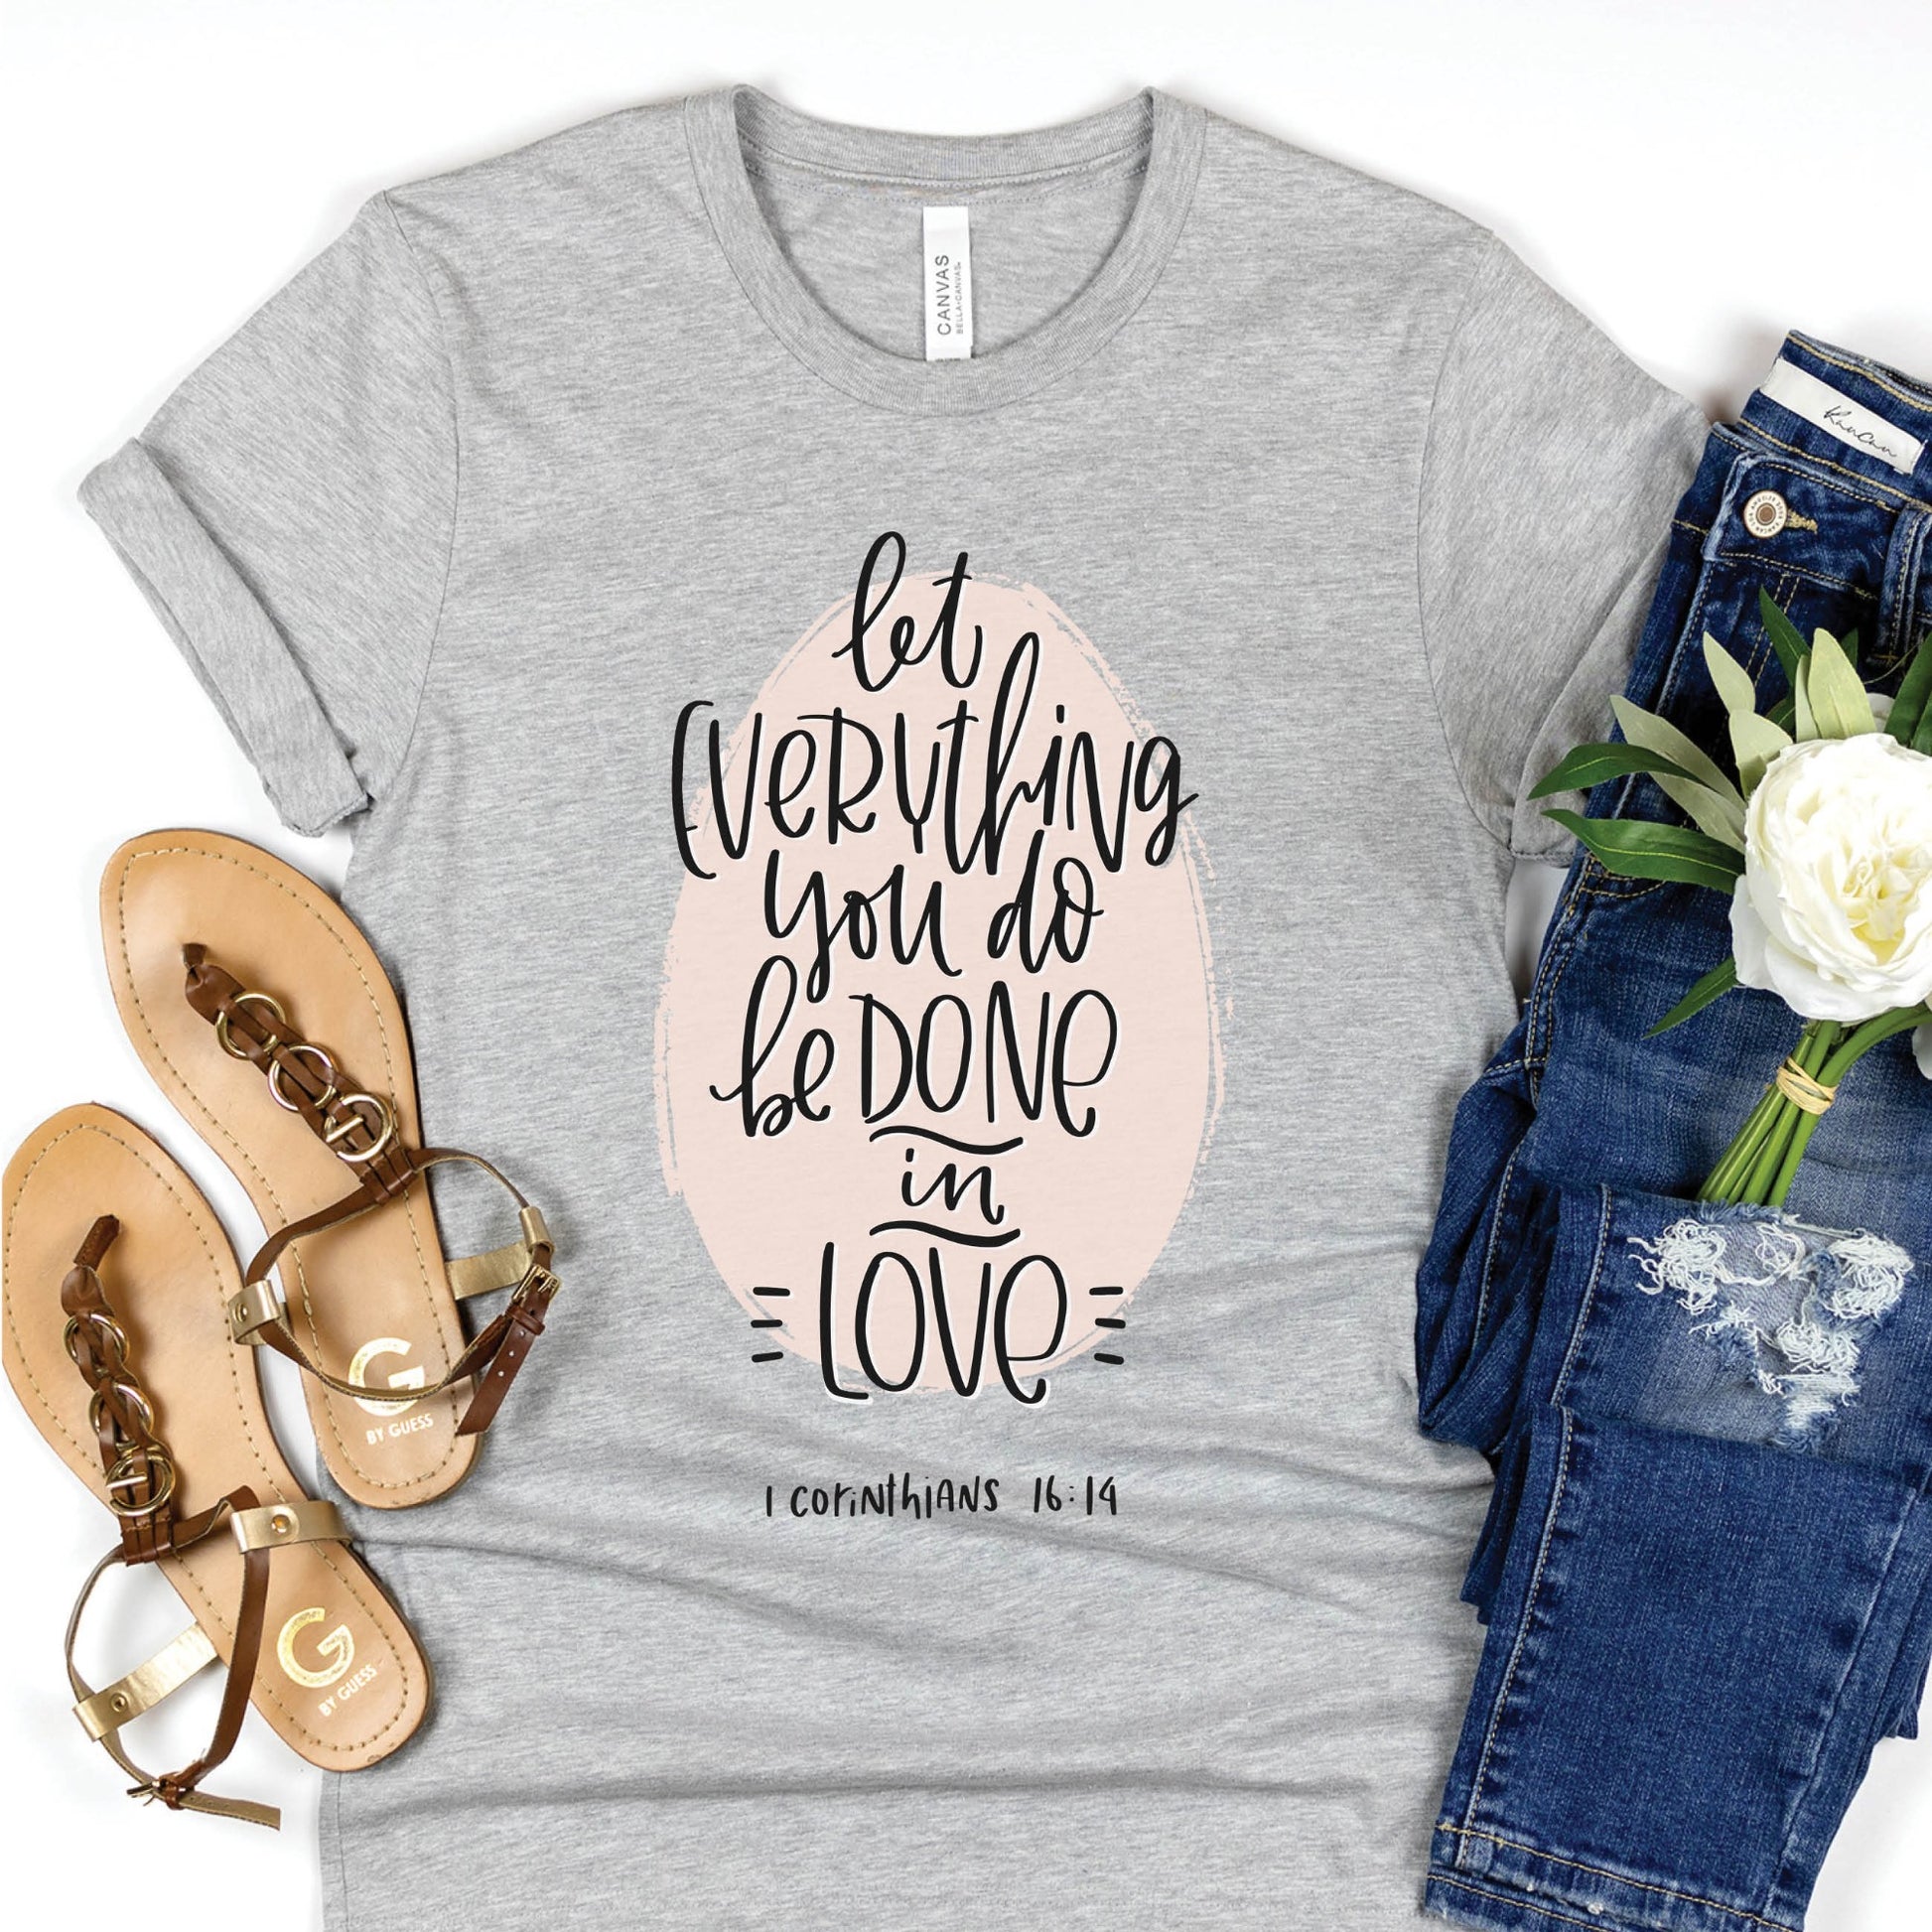 Soft quality athletic heather gray t-shirt with 1 Corinthians 16:14 Let Everything You Do Be Done In Love bible verse printed in blush pink and black - Christian aesthetic unisex tee shirt design for women